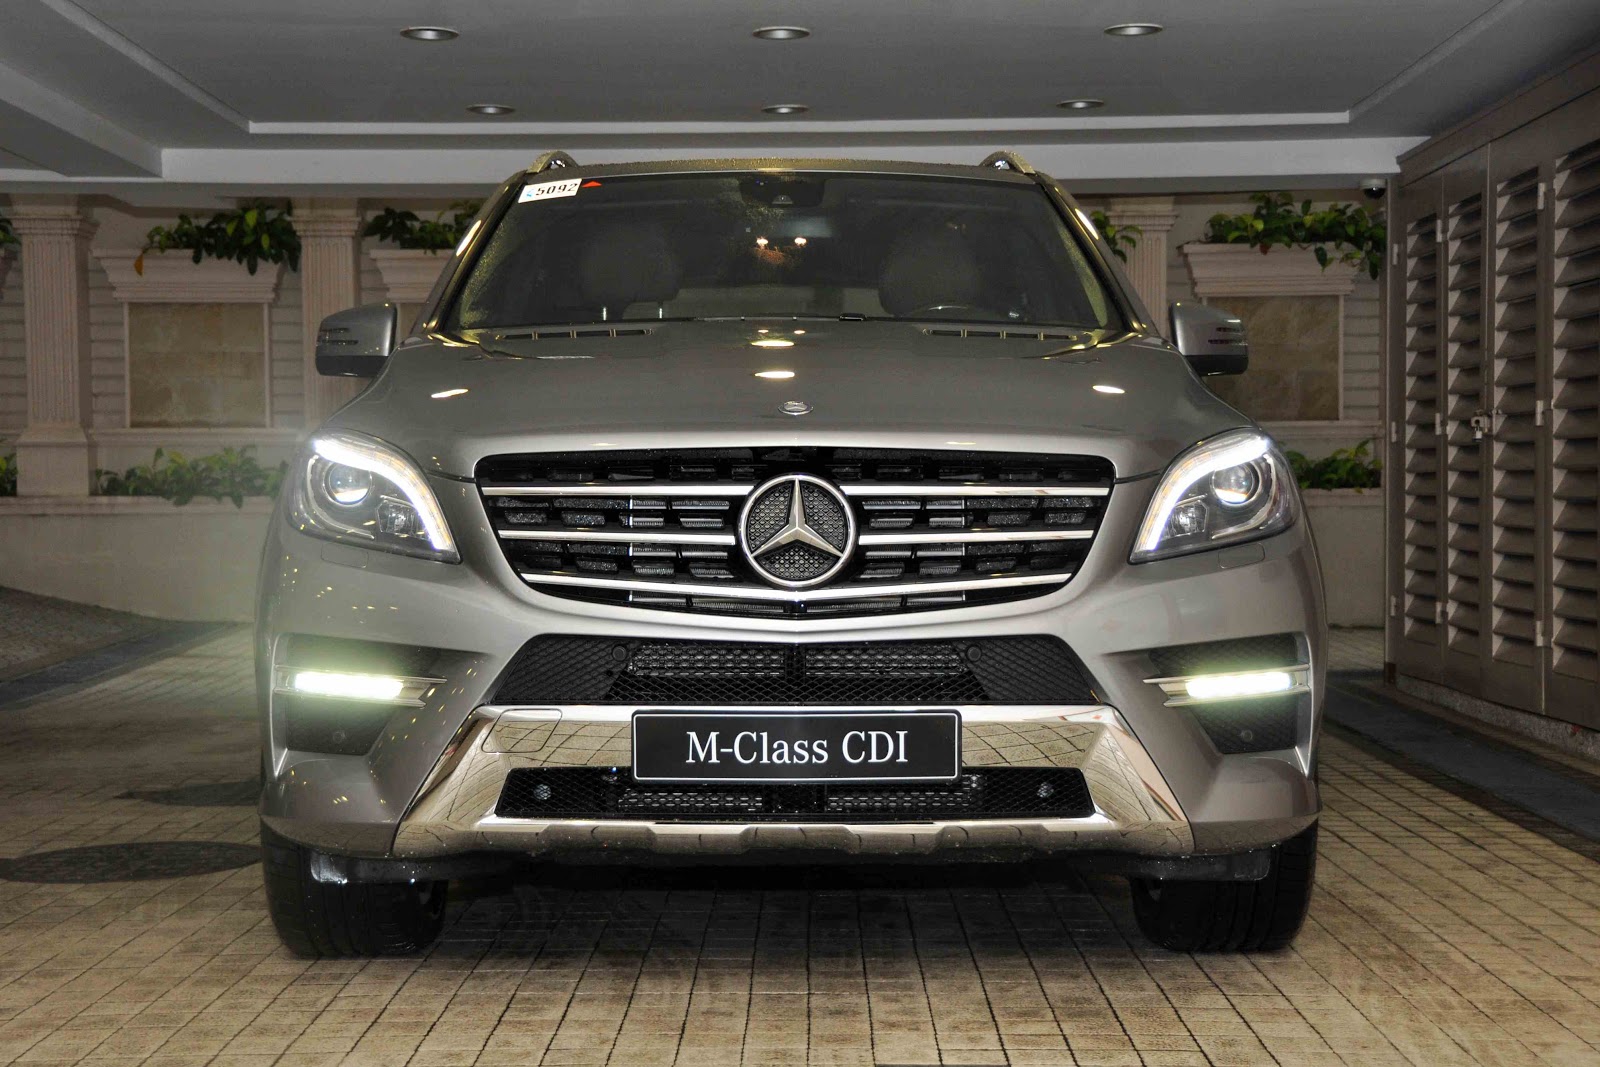 On your MARK: 2012 Mercedes Benz ML 350 CDI